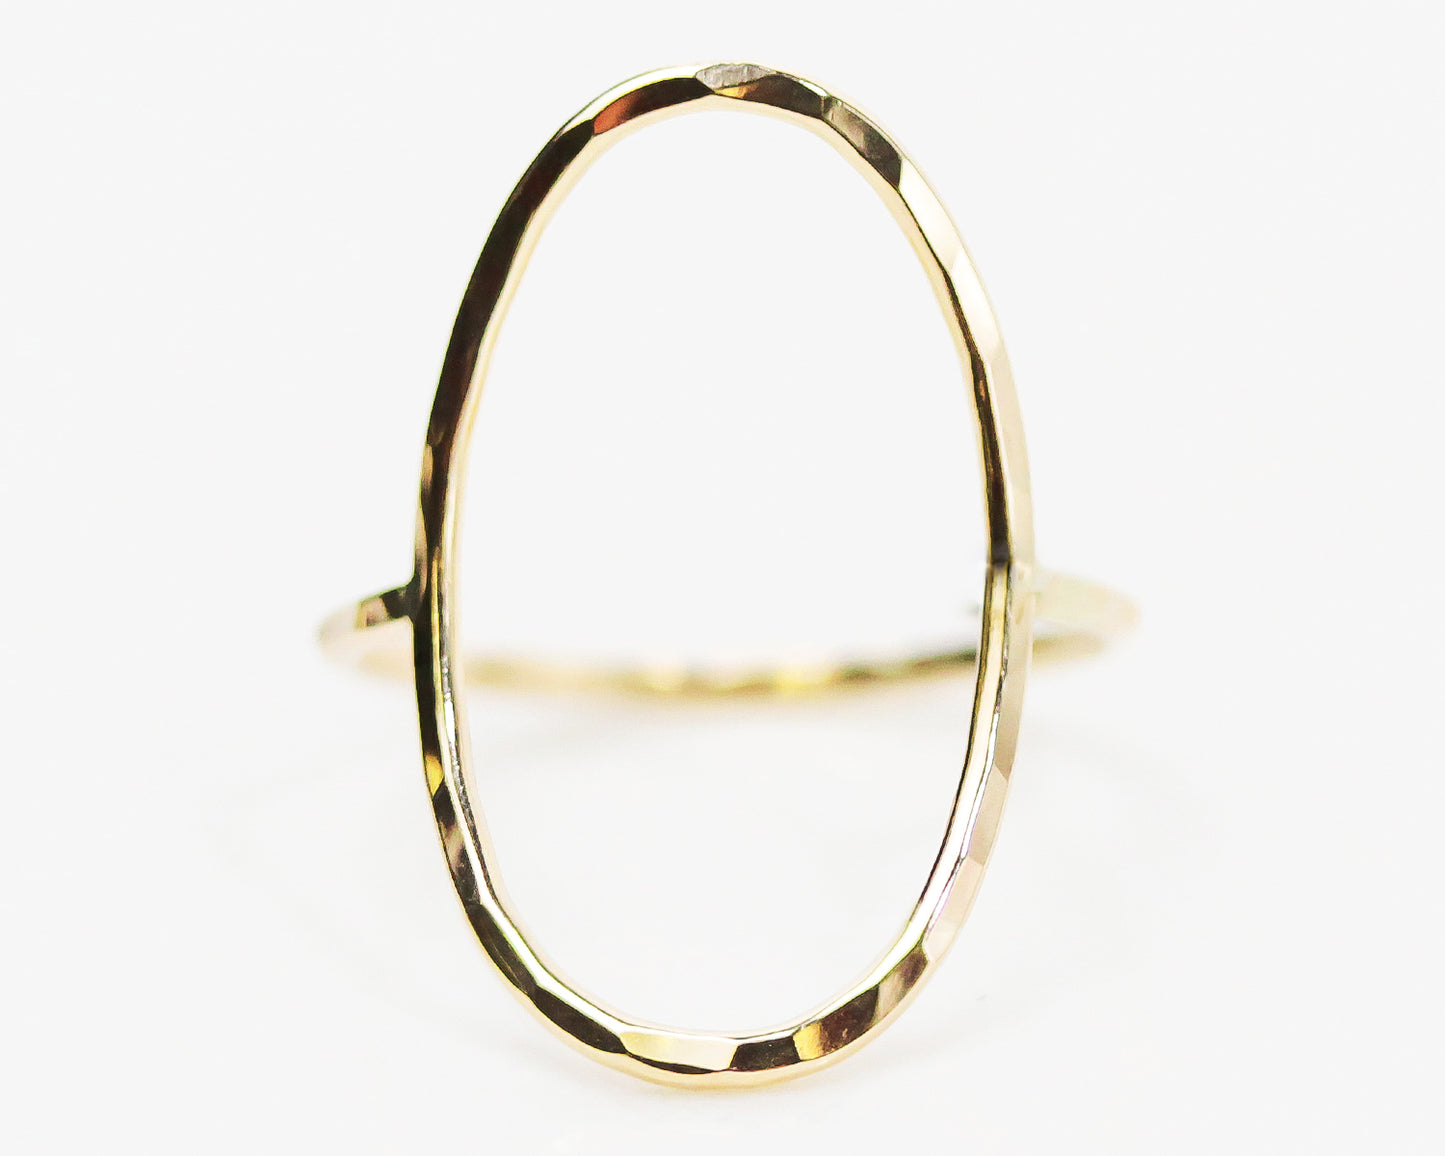 The Ellipse Ring